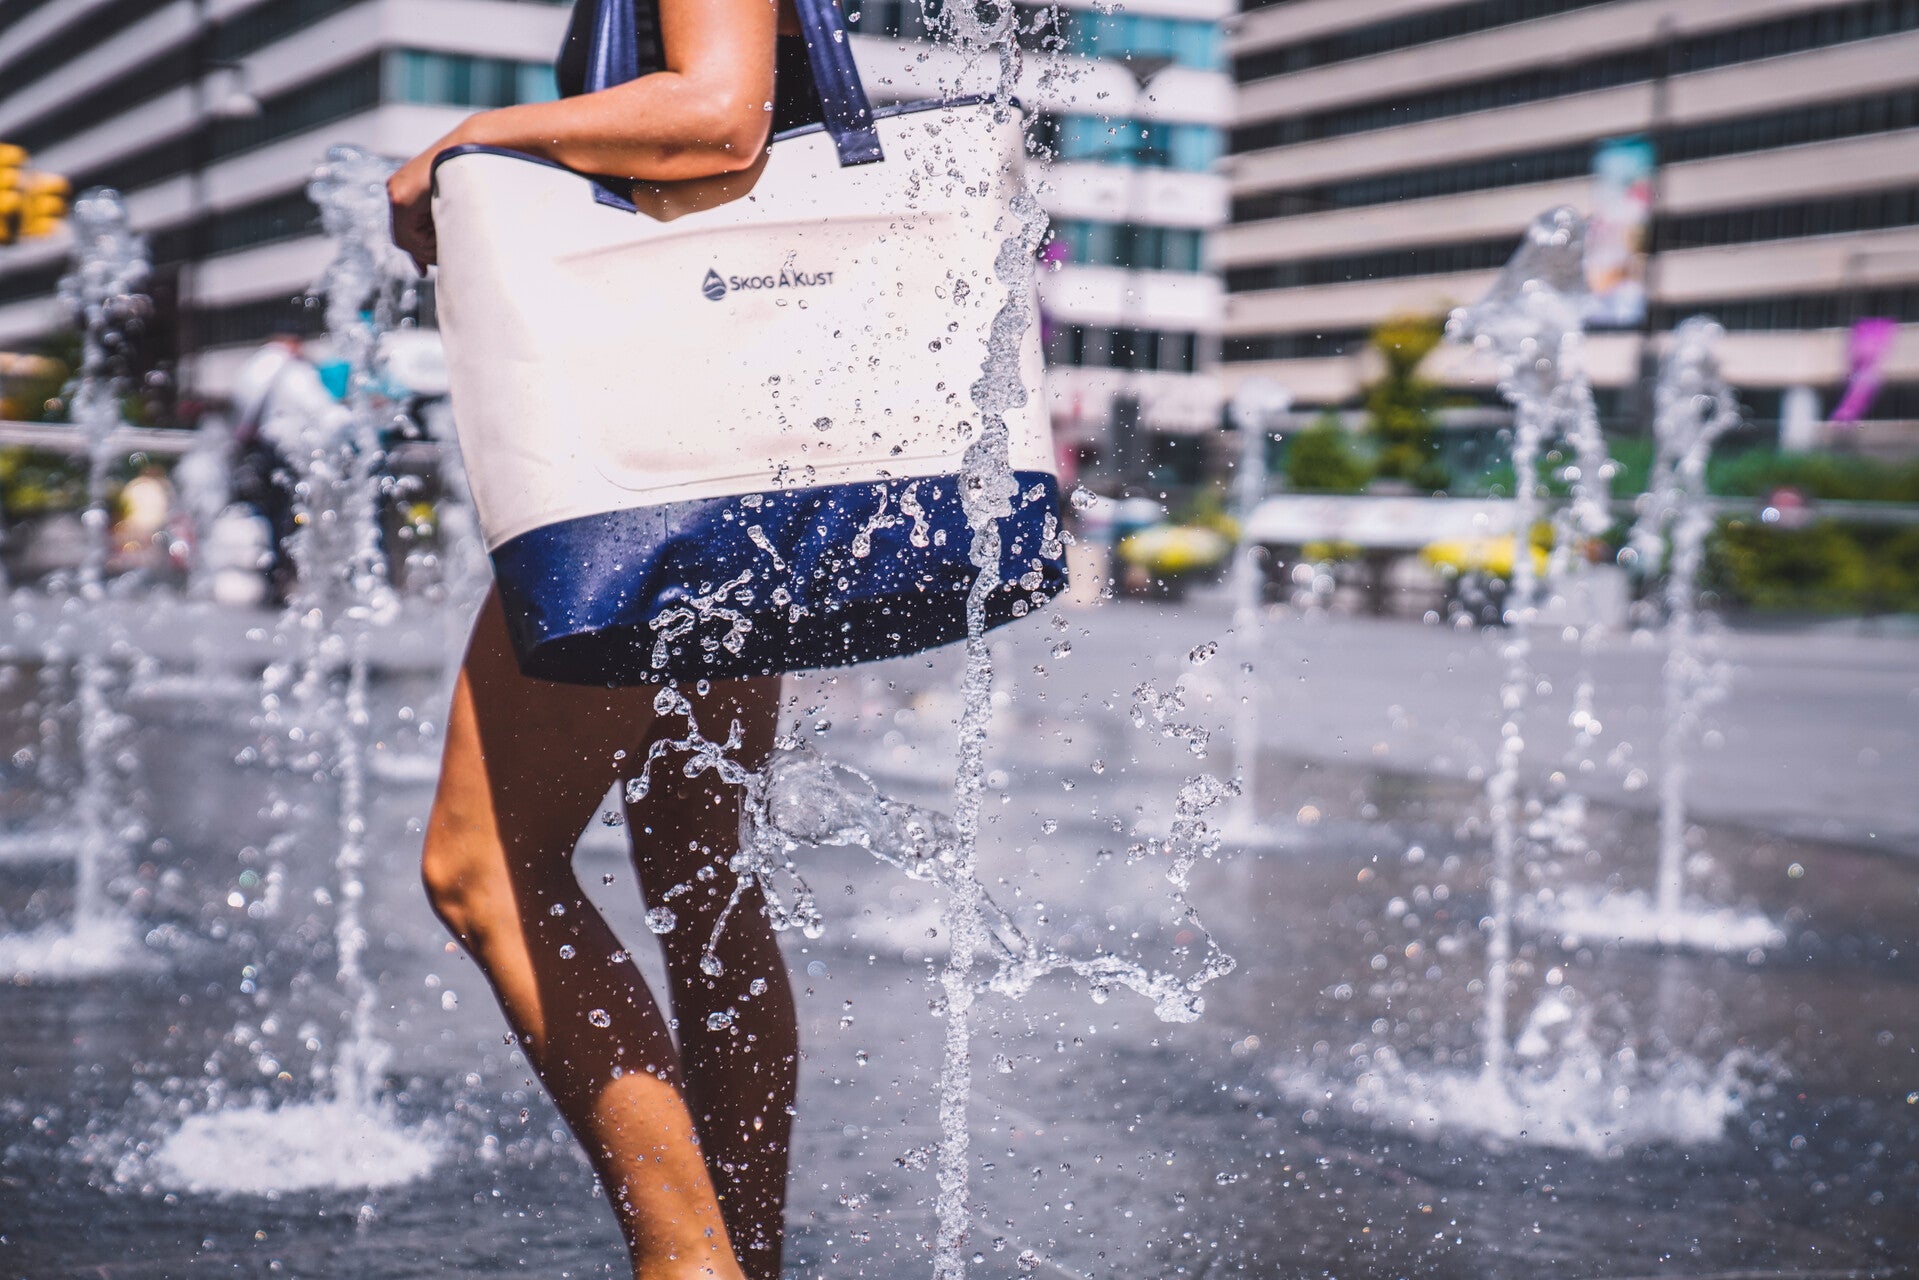 The Skog A Kust waterproof ToteSak Tote Bag being used by a women to protect their belongings while walking through a spouting water feature in the city